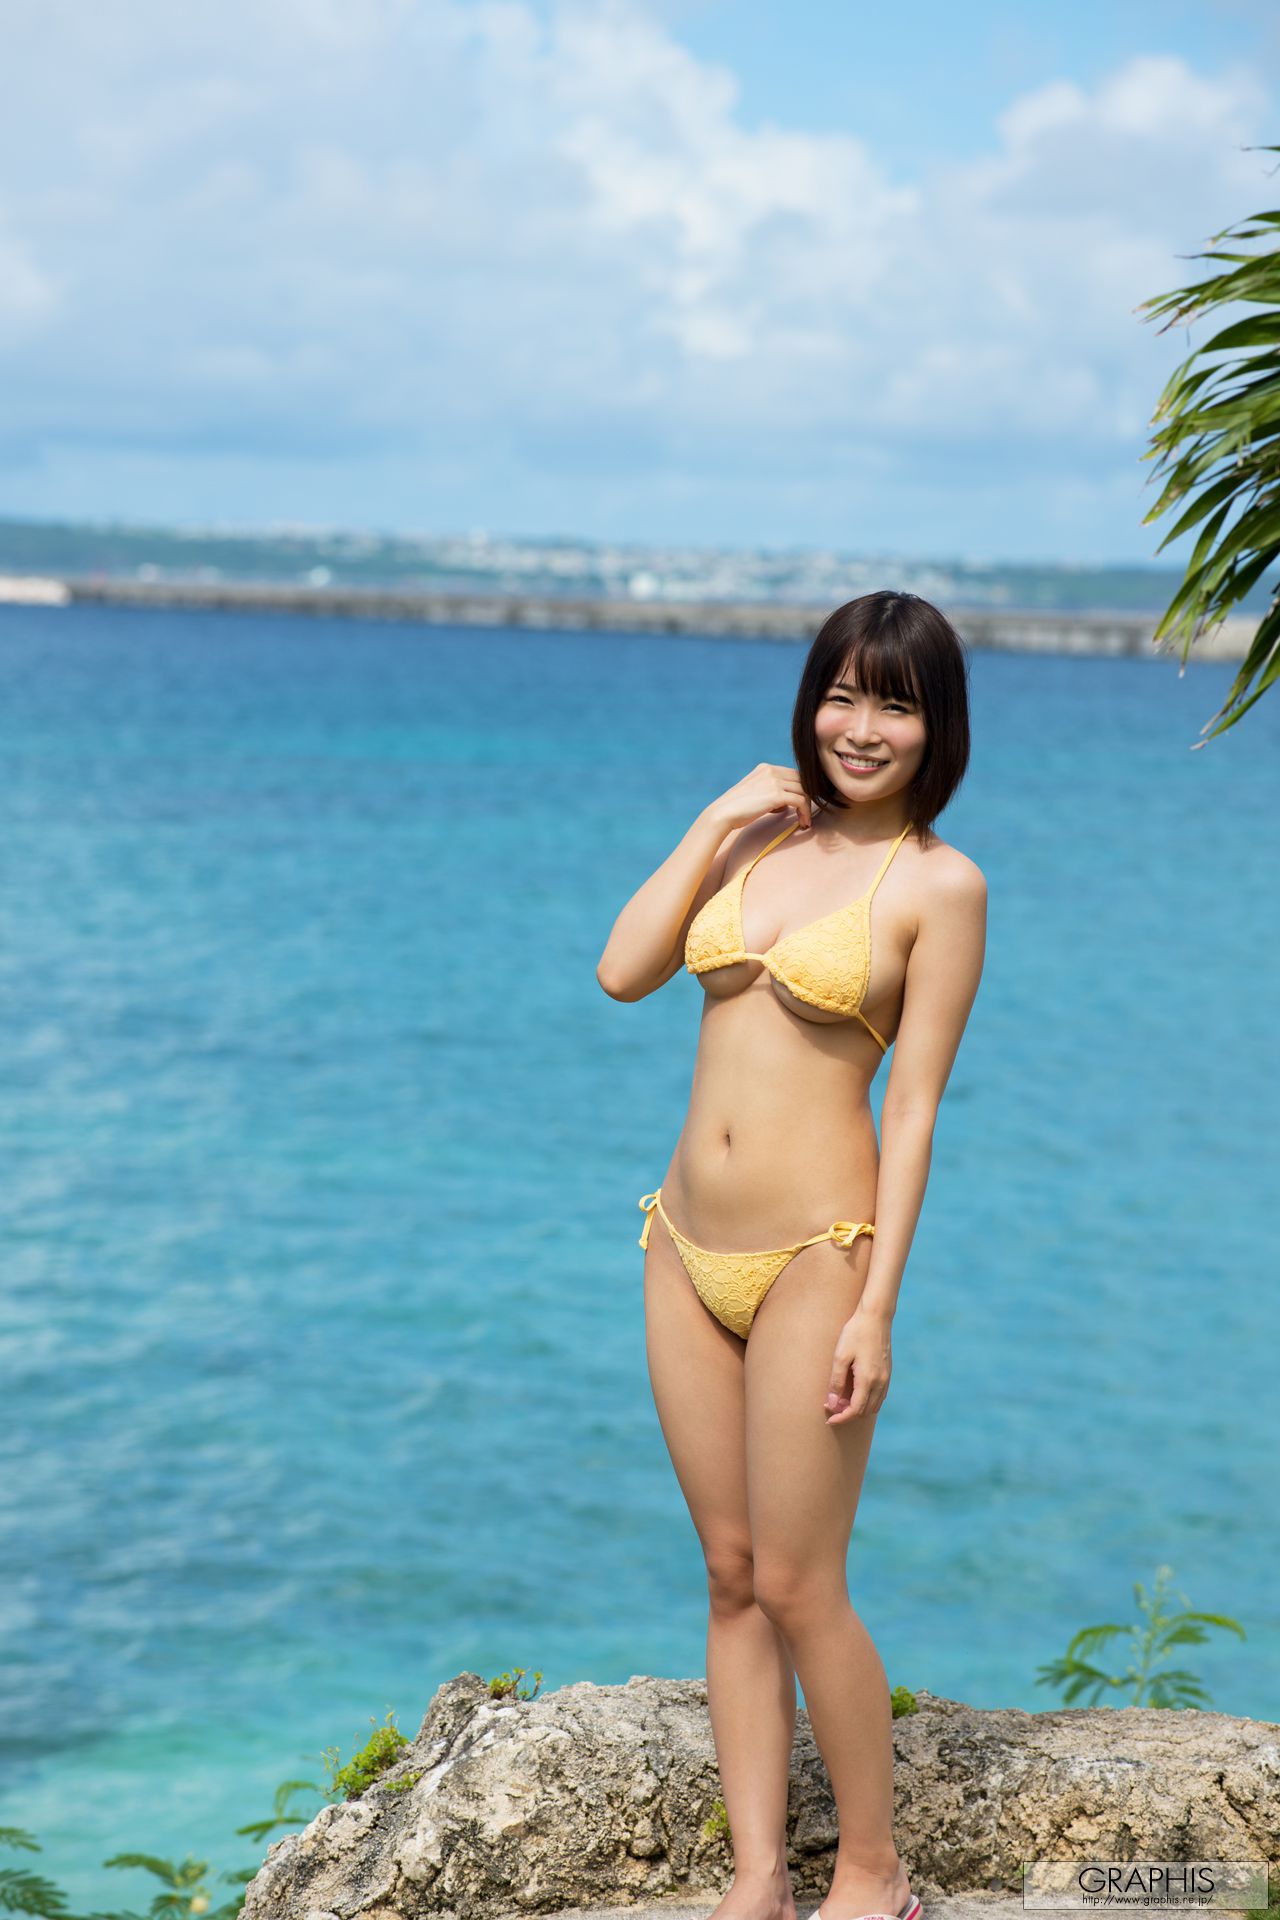 [Graphis] NO.444 河合あすな - Godly beautiful breast[69](第2页)